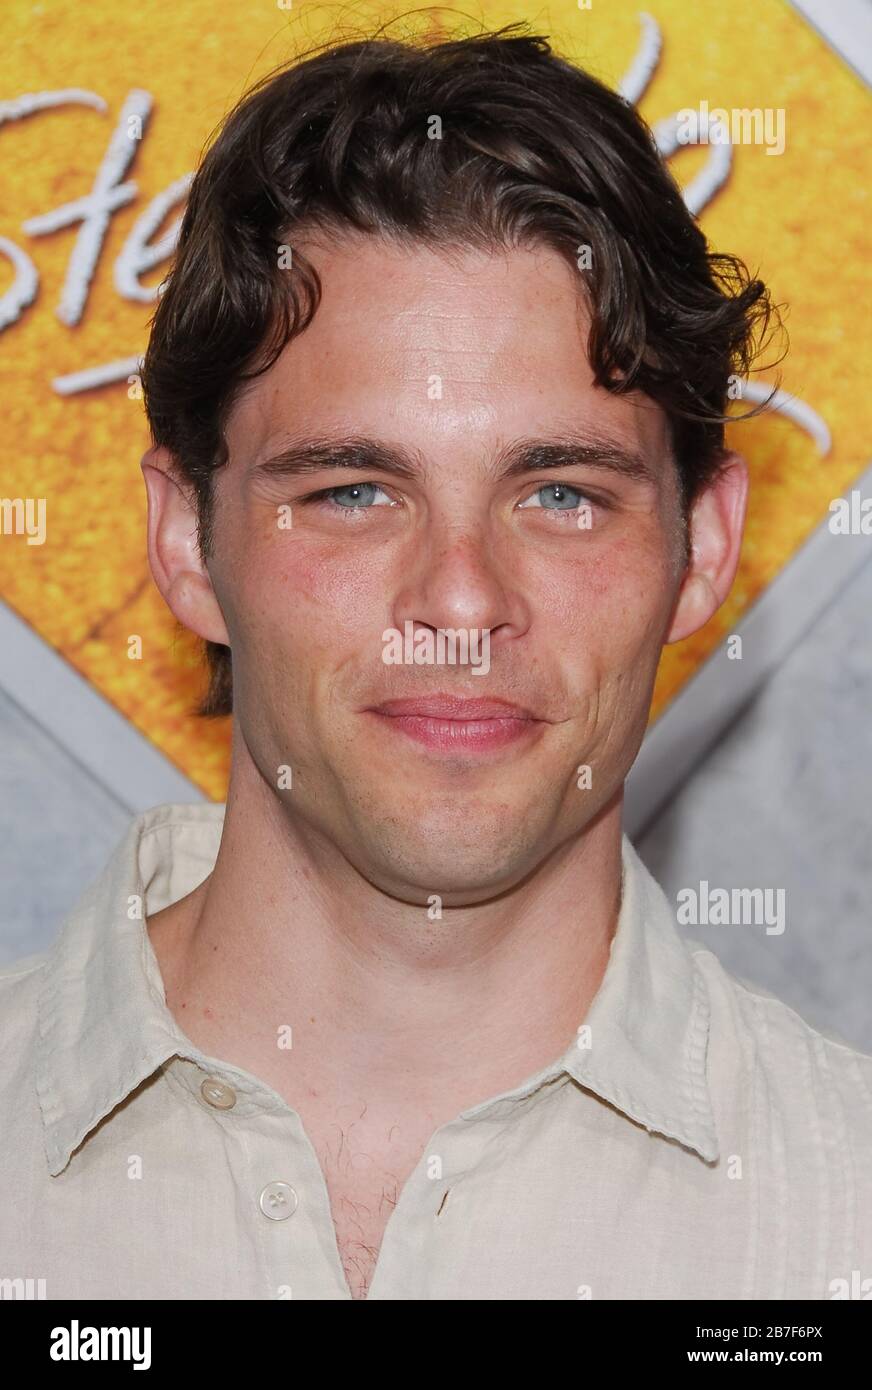 James Marsden at the World Premiere of 'Step Up' held at the Arclight Cinemas in Hollywood, CA. The event took place on Monday, August 7, 2006.  Photo by: SBM / PictureLux Stock Photo